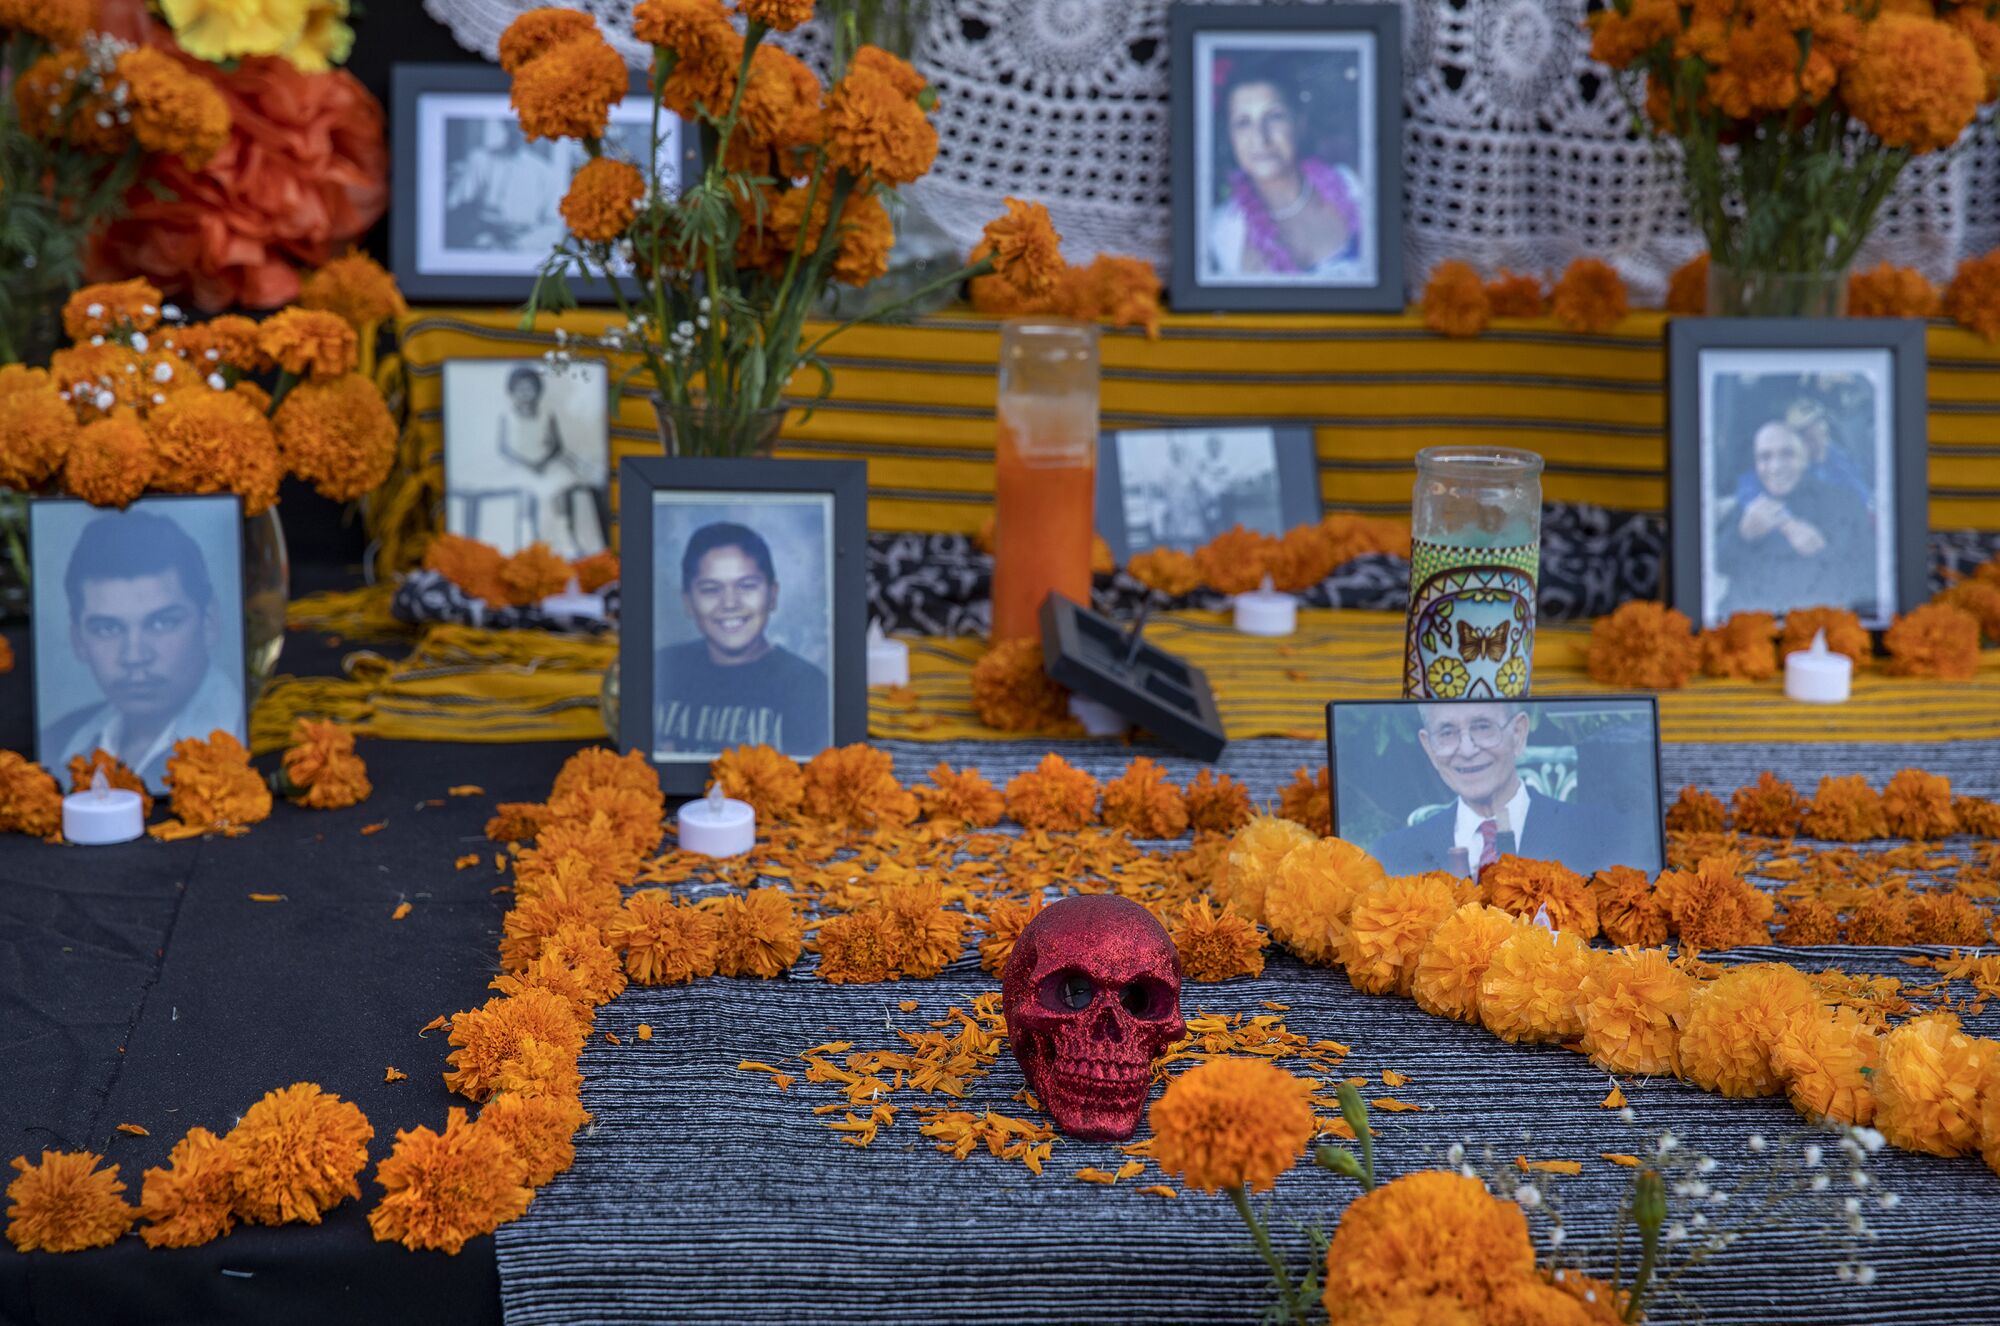 Photos of individuals are seen among orange carnations in the community altar.